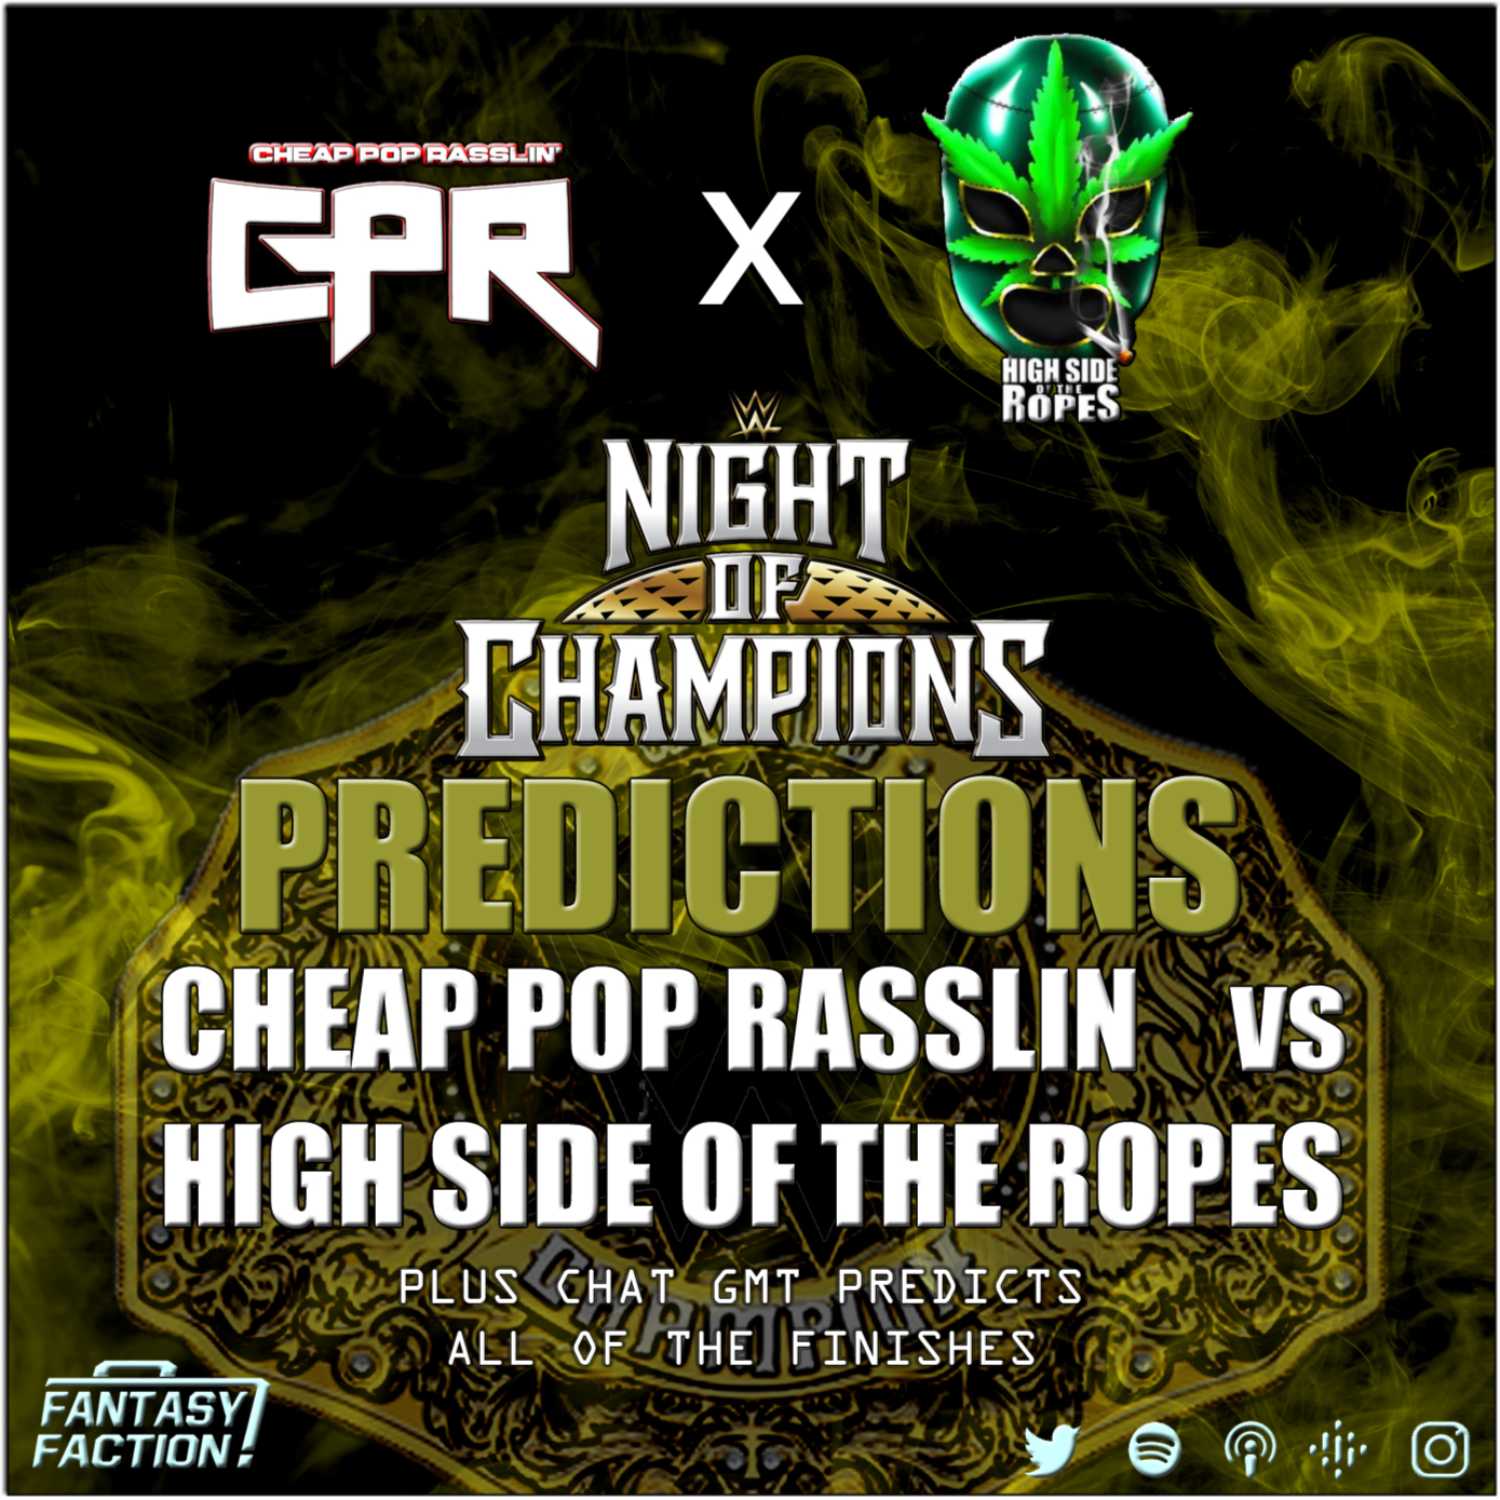 WWE Night of Champions Predictions (featuring HIGH SIDE OF THE ROPES!)